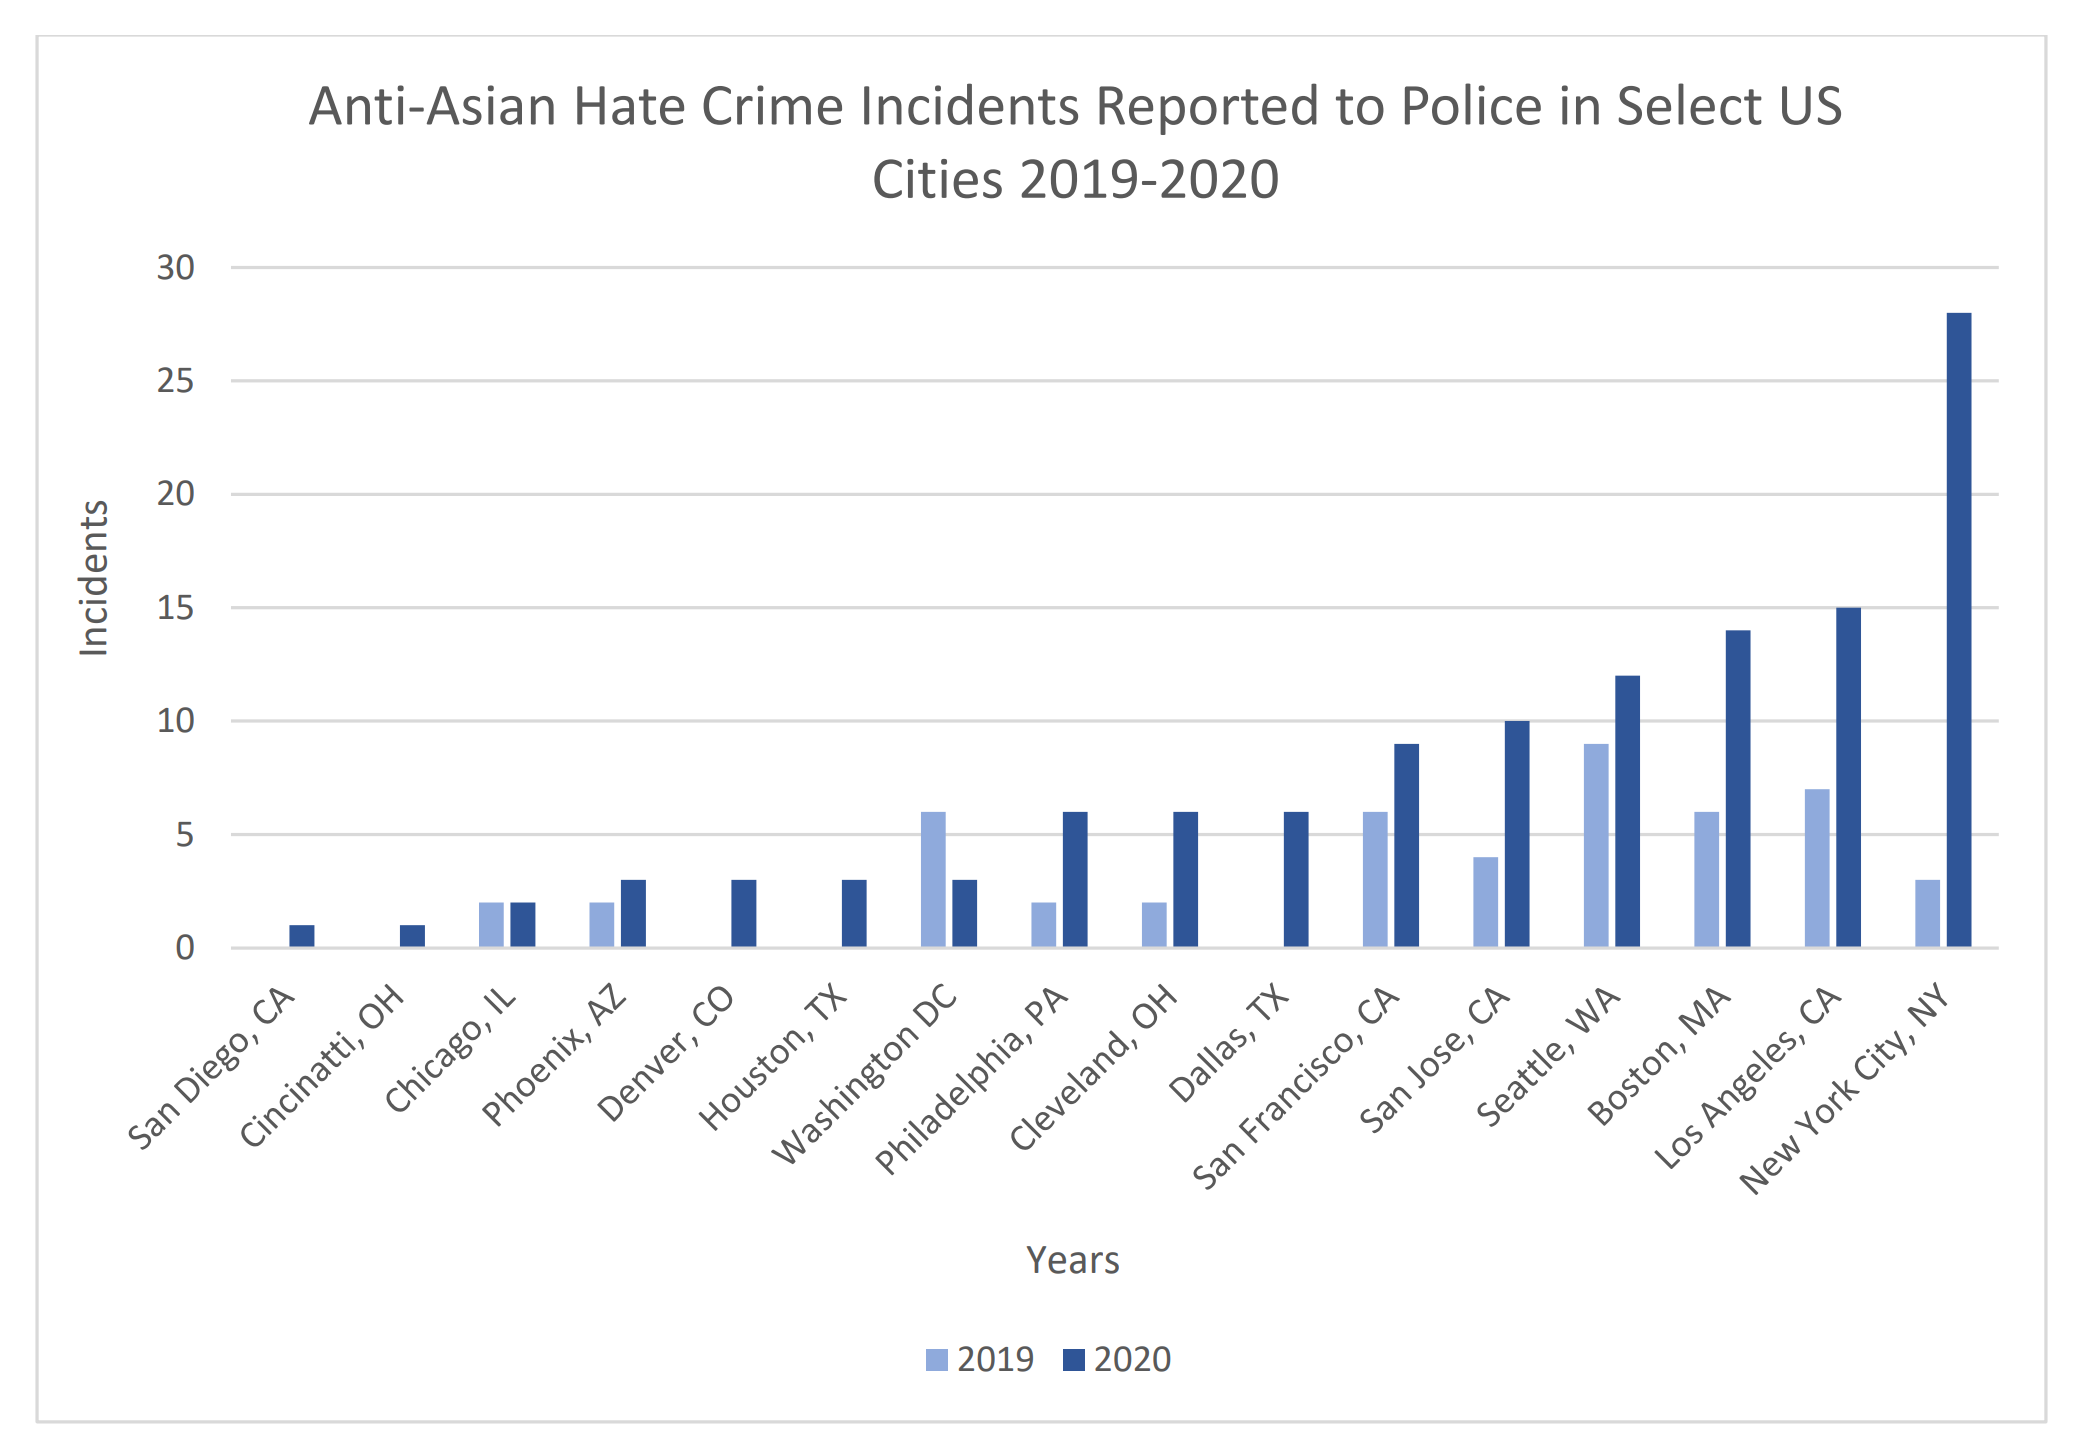 Anti‐Asian hate crime incidents reported to police in select U.S. cities, 2019‐2020. Graphic: CSUSB Center for the Study of Hate and Extremism